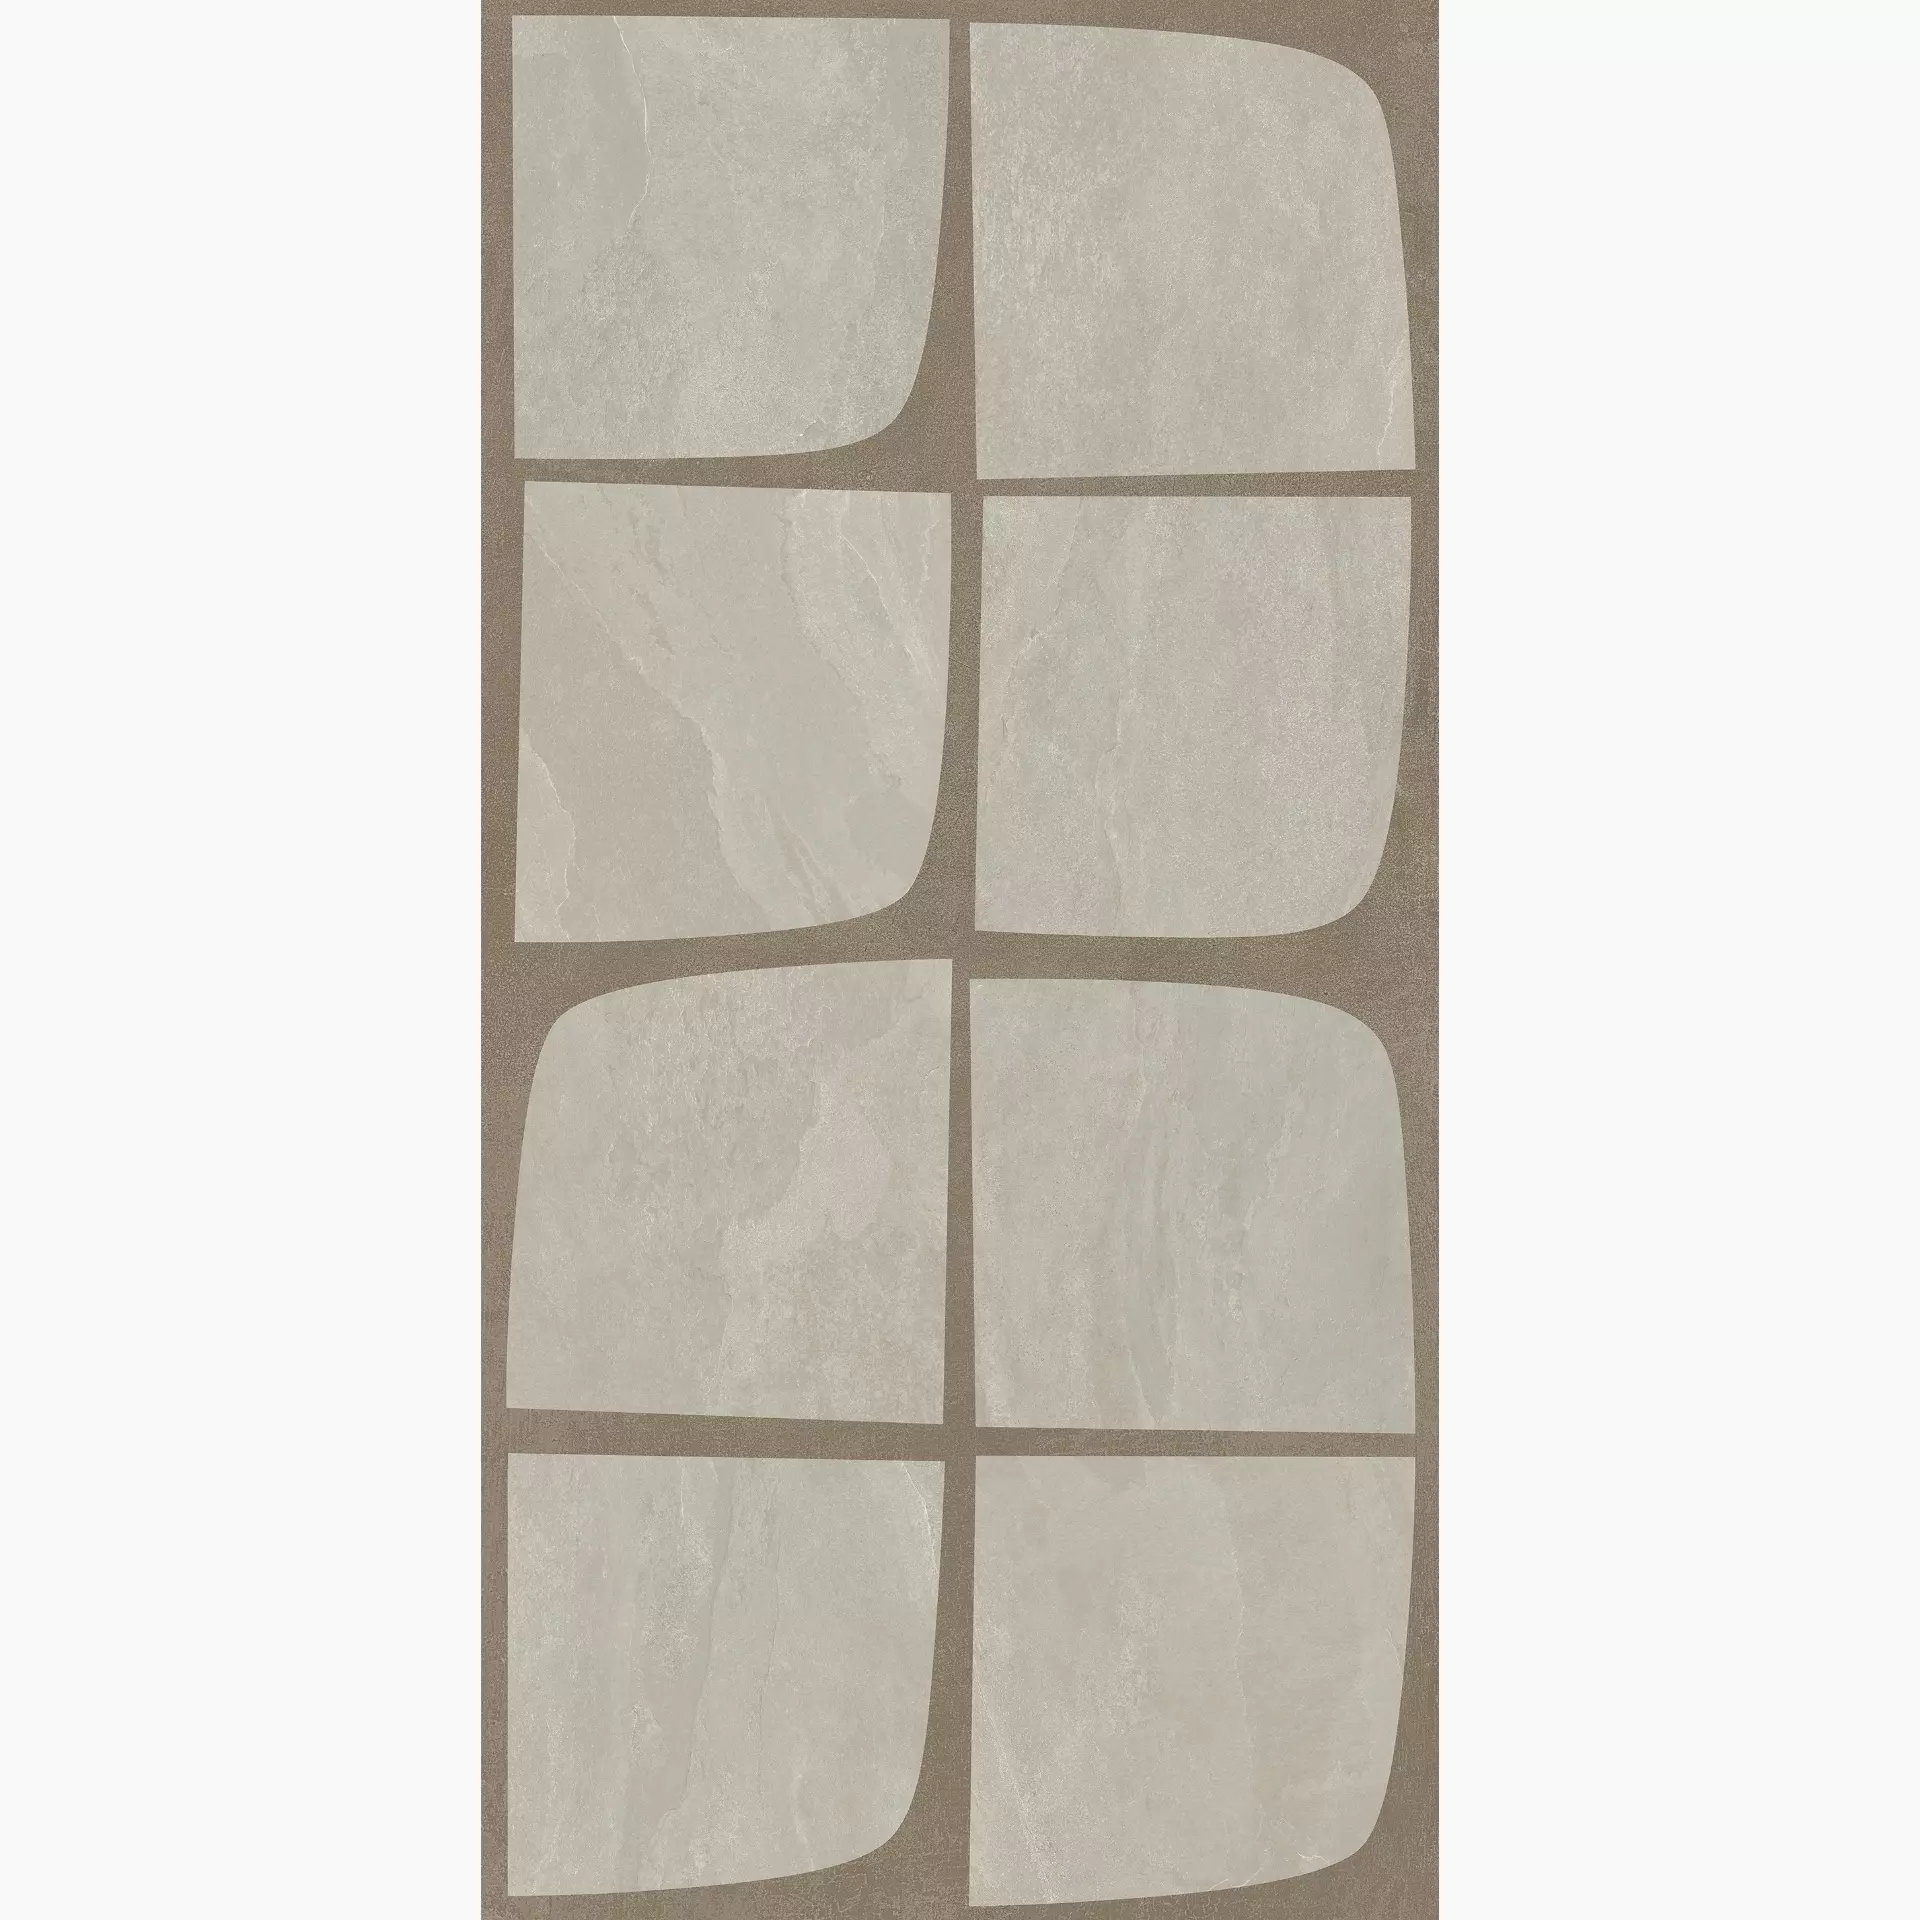 Del Conca Hns Nesting Almond Hns Naturale Decor Synergie GCNS01SINER 60x120cm rectified 8,5mm